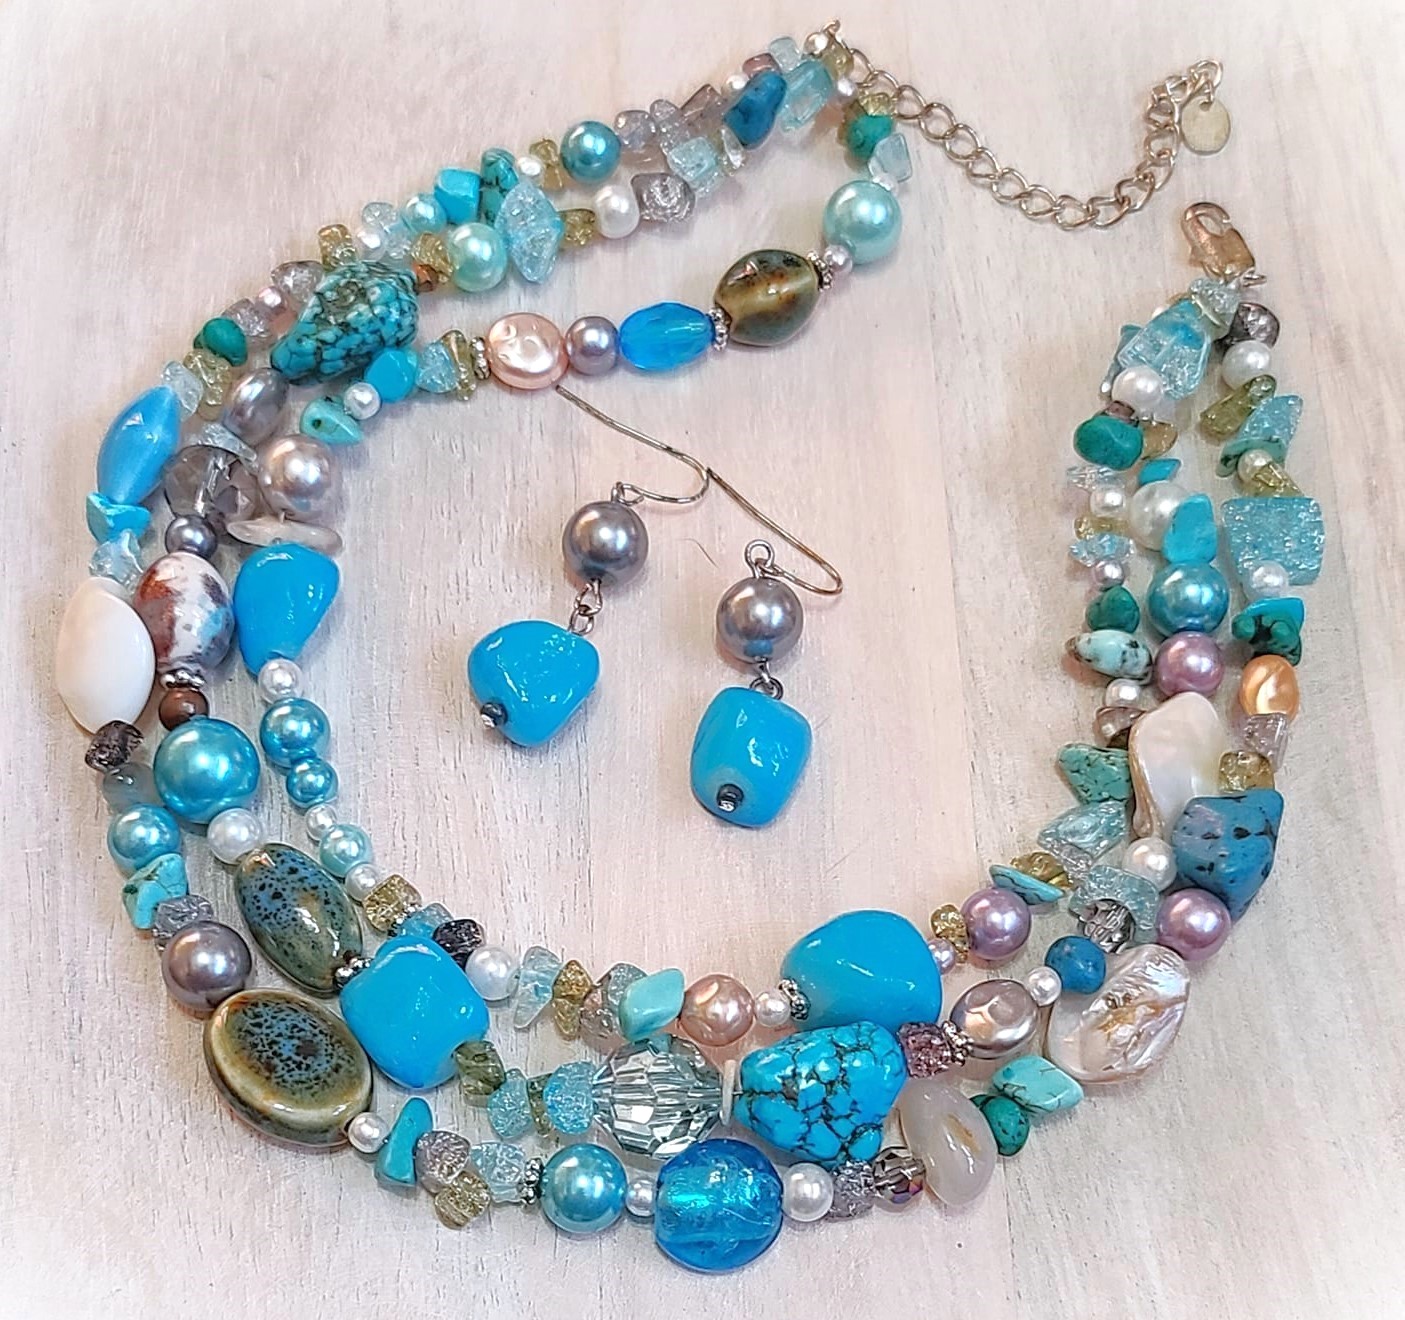 Turquoise howlite, glass, ceramic 3 strand necklace and earrings